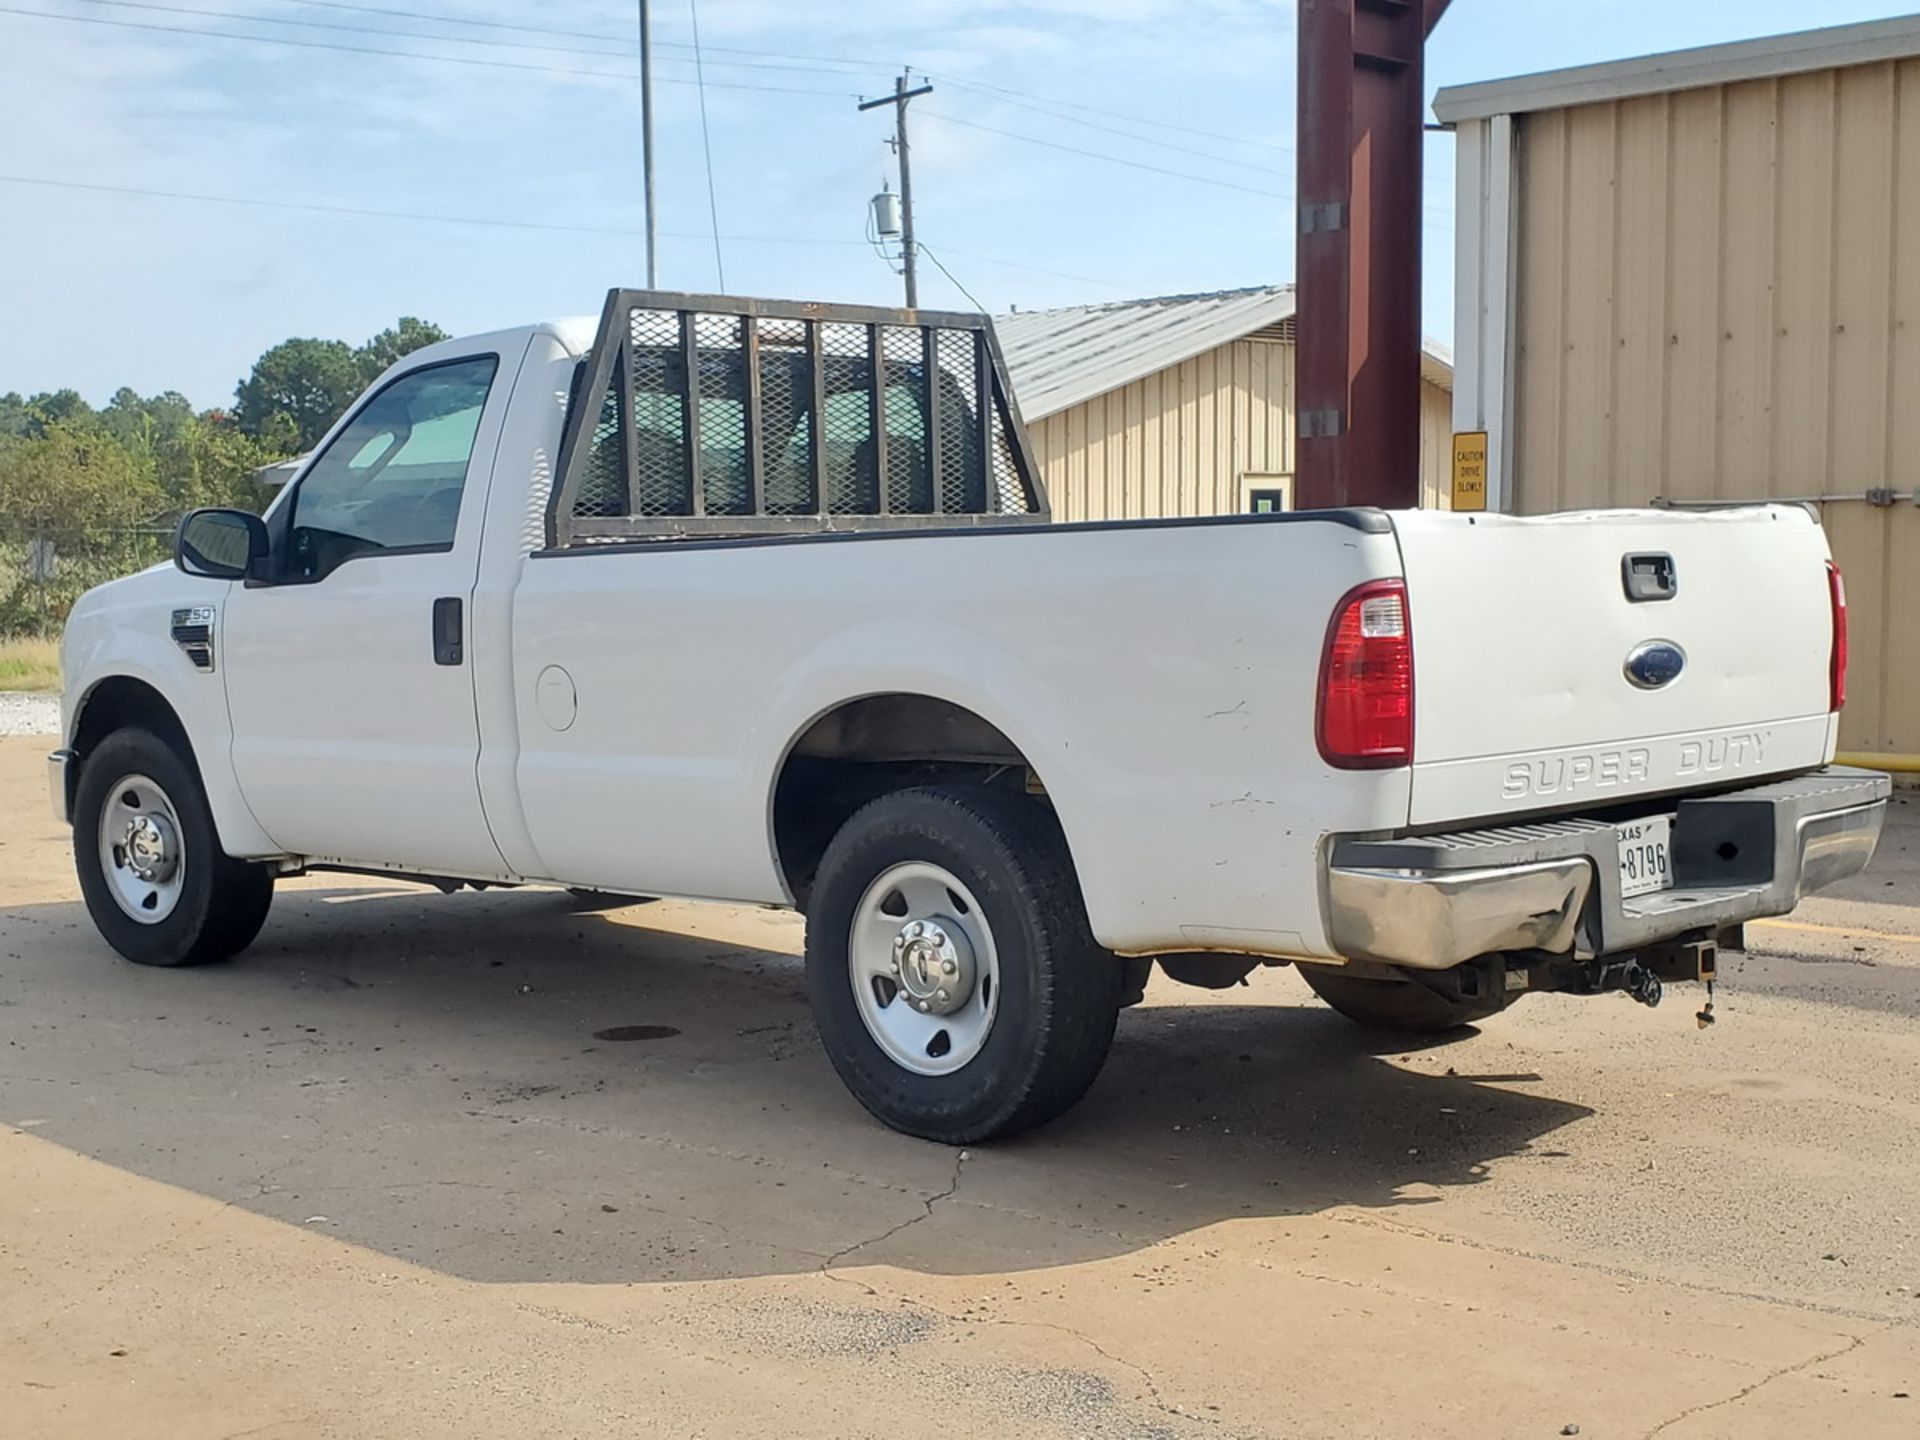 2008 Ford F-250 Pickup V8 Engine, Vin: 1FTN20518ED94781, 95,506 Mileage, Plate: TX GTP-8796 - Image 3 of 16